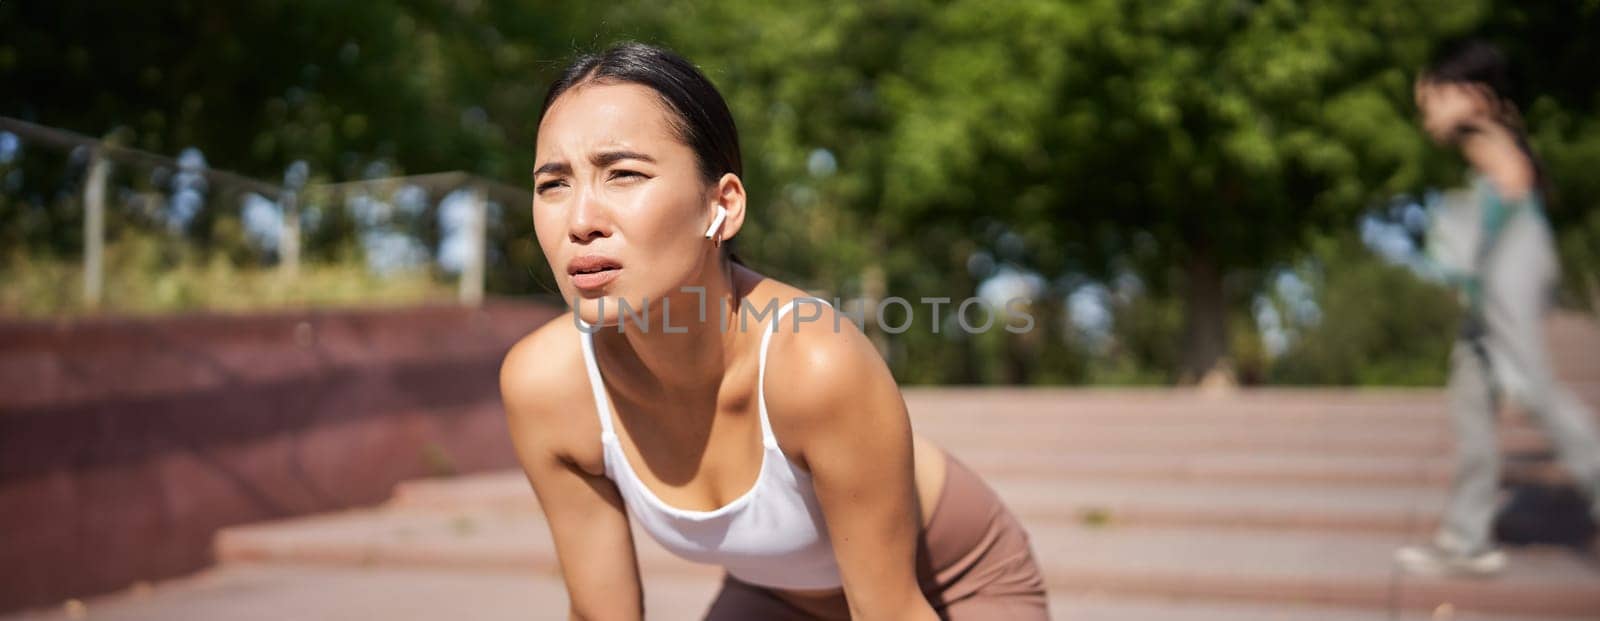 Tired young female runner, asian girl taking break during workout, stop jogging, panting while breathing, running in park.